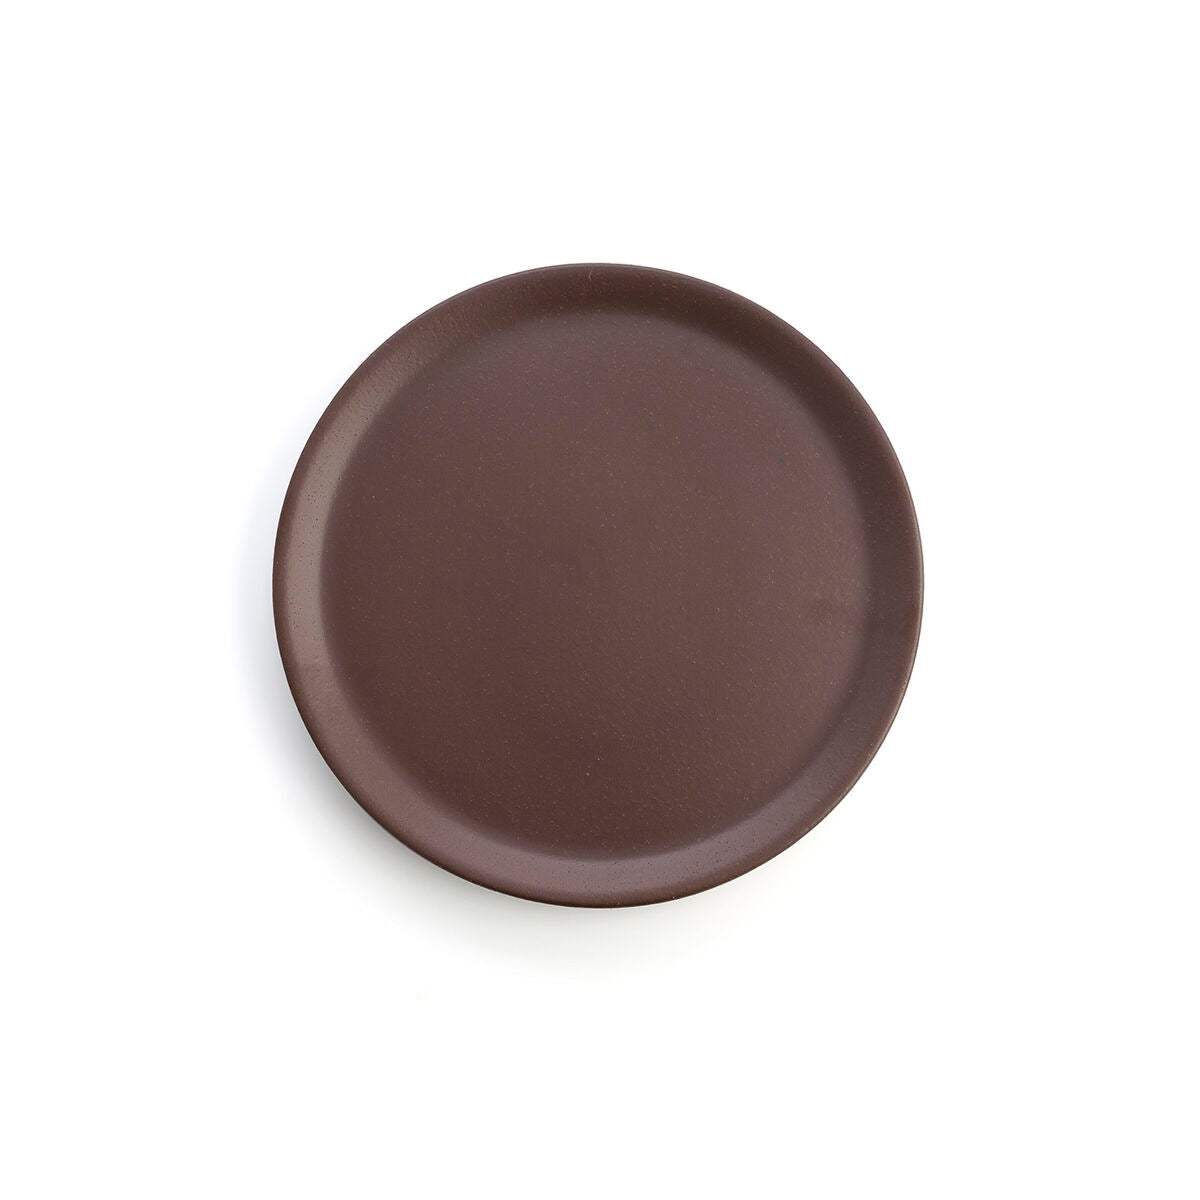 Flat Plate Anaflor Barro Anaflor Brown Baked clay Ø 31 cm Meat (8 Units)